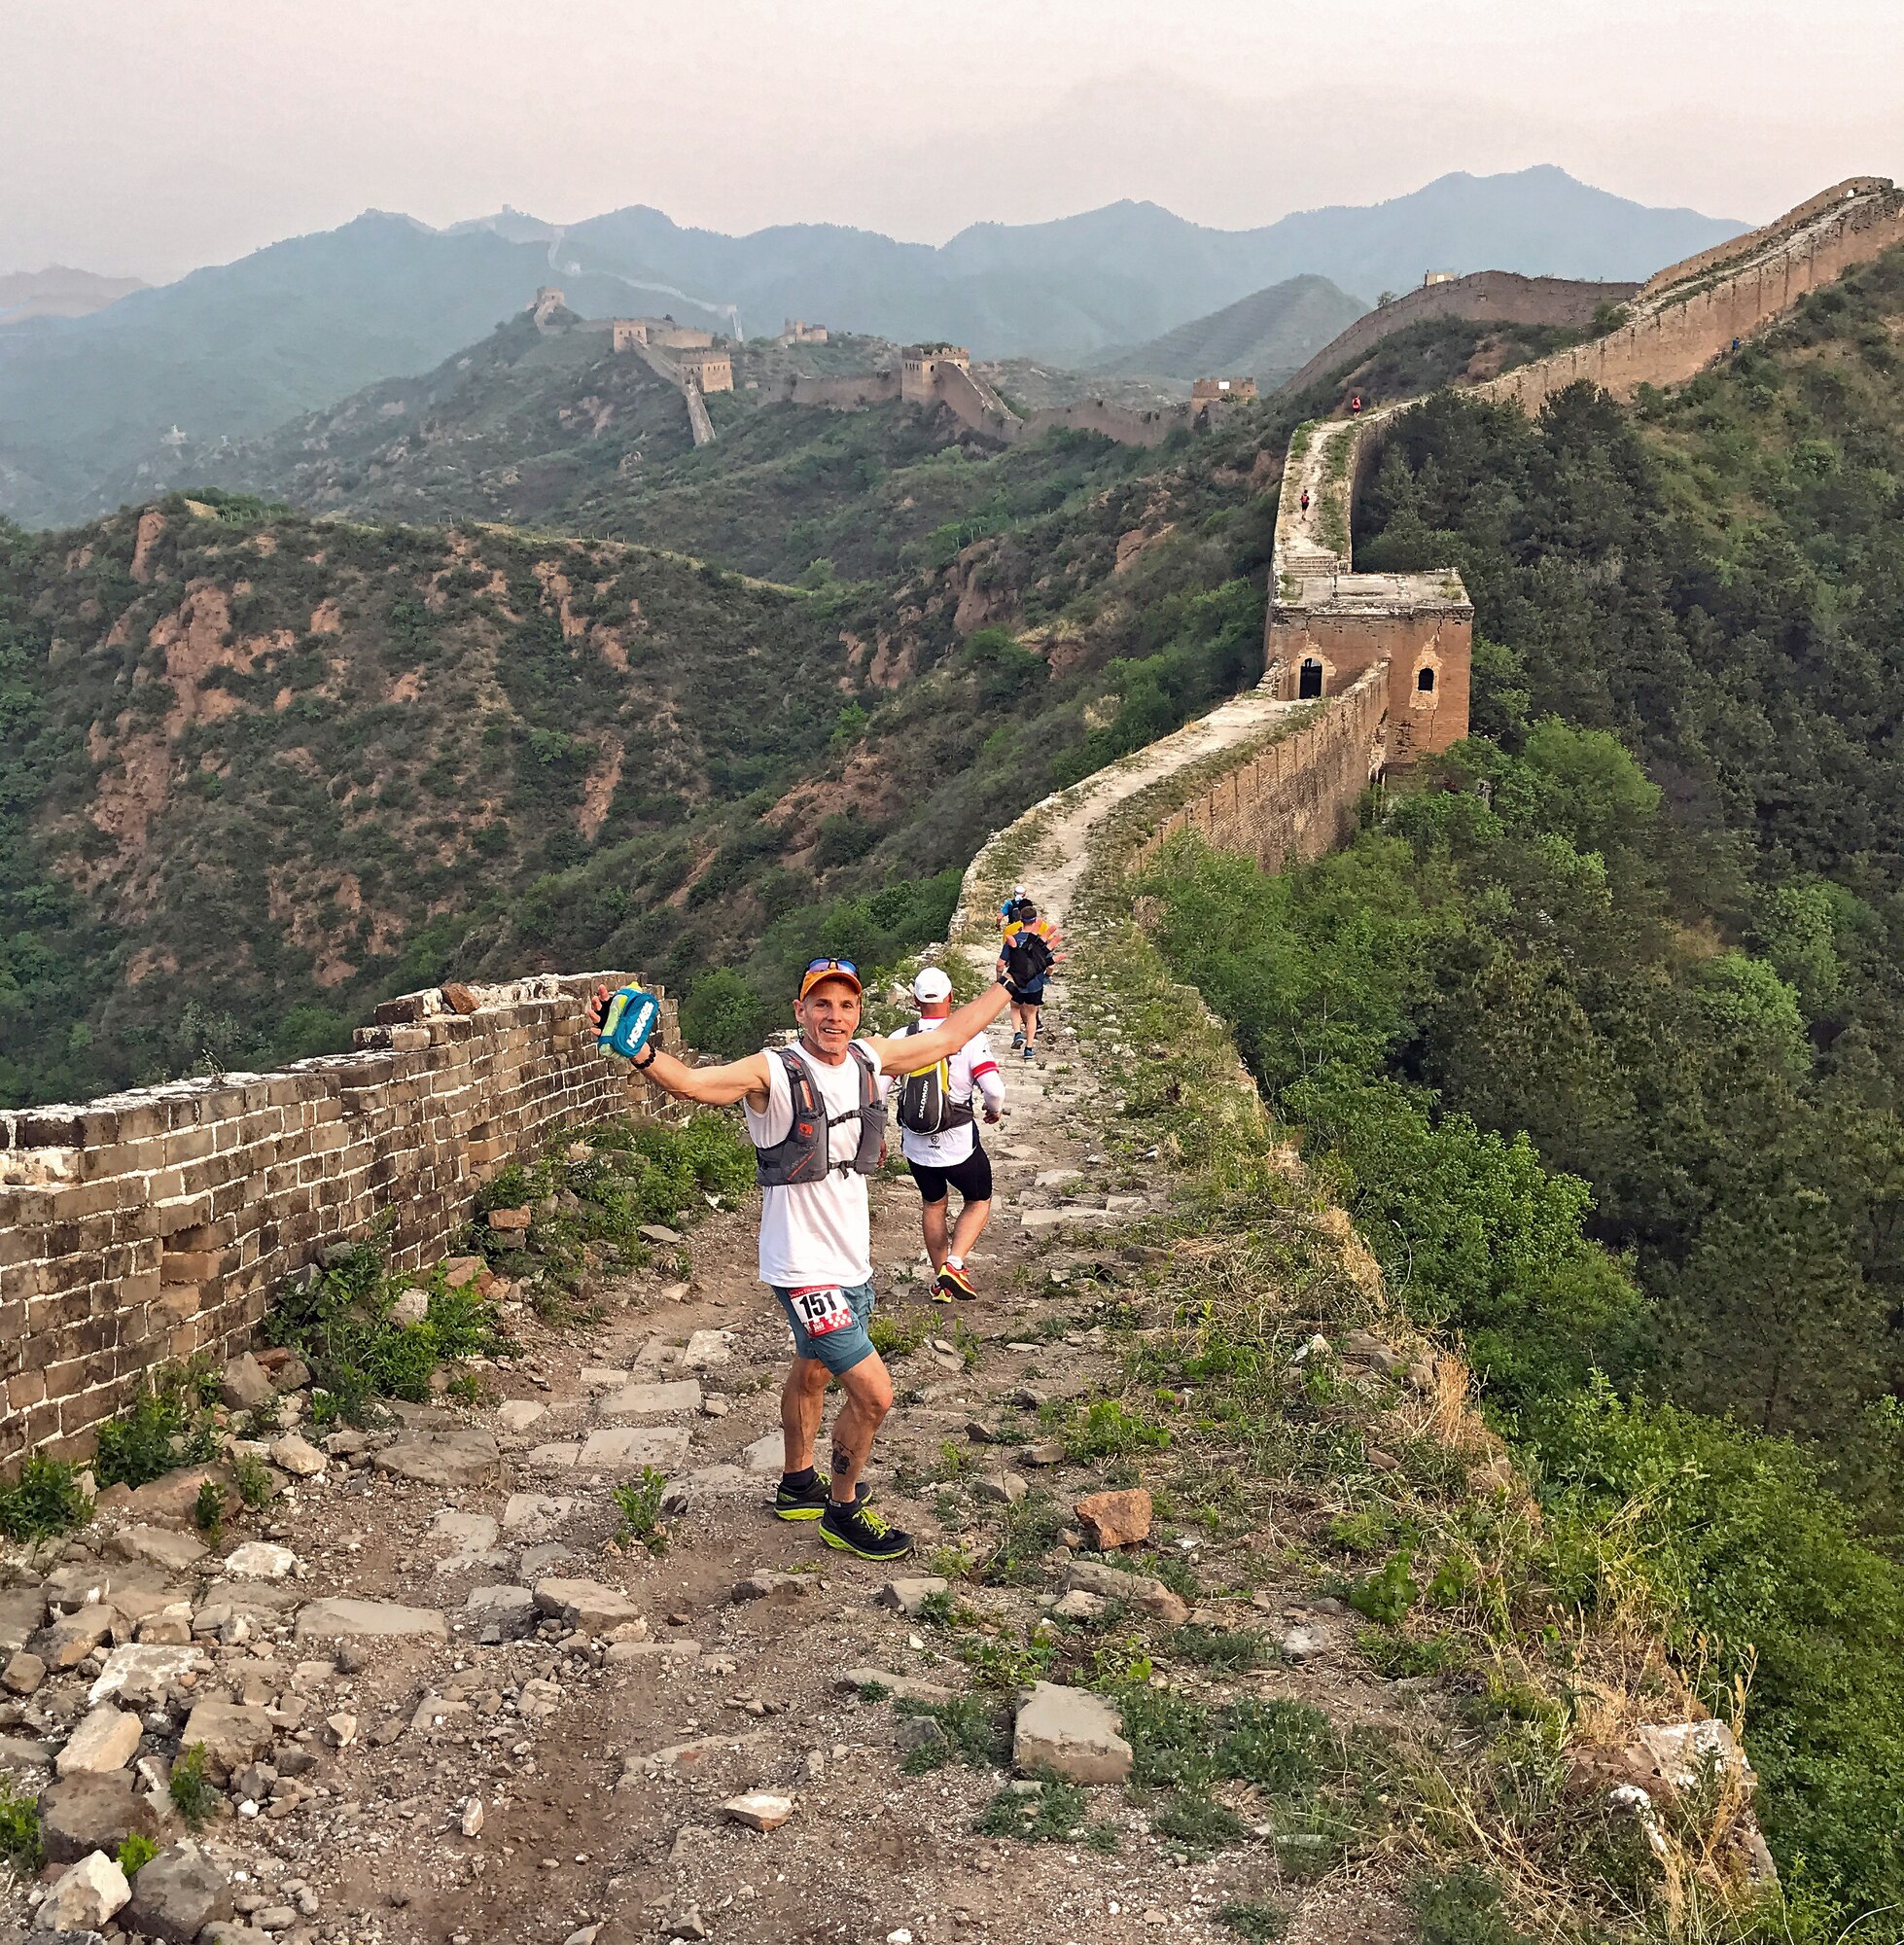 Bruce Robie, 225th Support Squadron National Airspace Defense program manager, runs the Conquer the Wall Marathon in Beijing, China, May 11, 2019.  Robie placed 10th overall, first in his age group of 50-59 and was the oldest competitor.  He completed the marathon in 9.5 hours. (Courtesy photo)